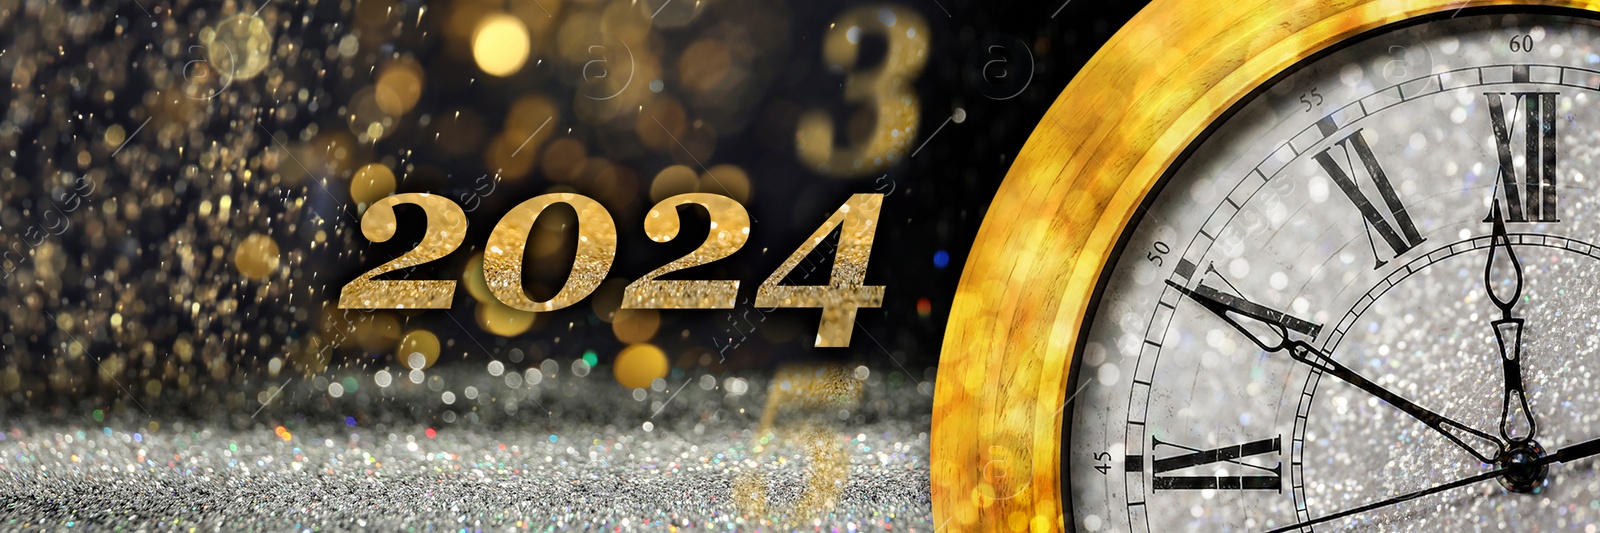 Image of Counting last moments to New 2024 Year. Greeting card with clock showing ten minutes until midnight on festive background, banner design